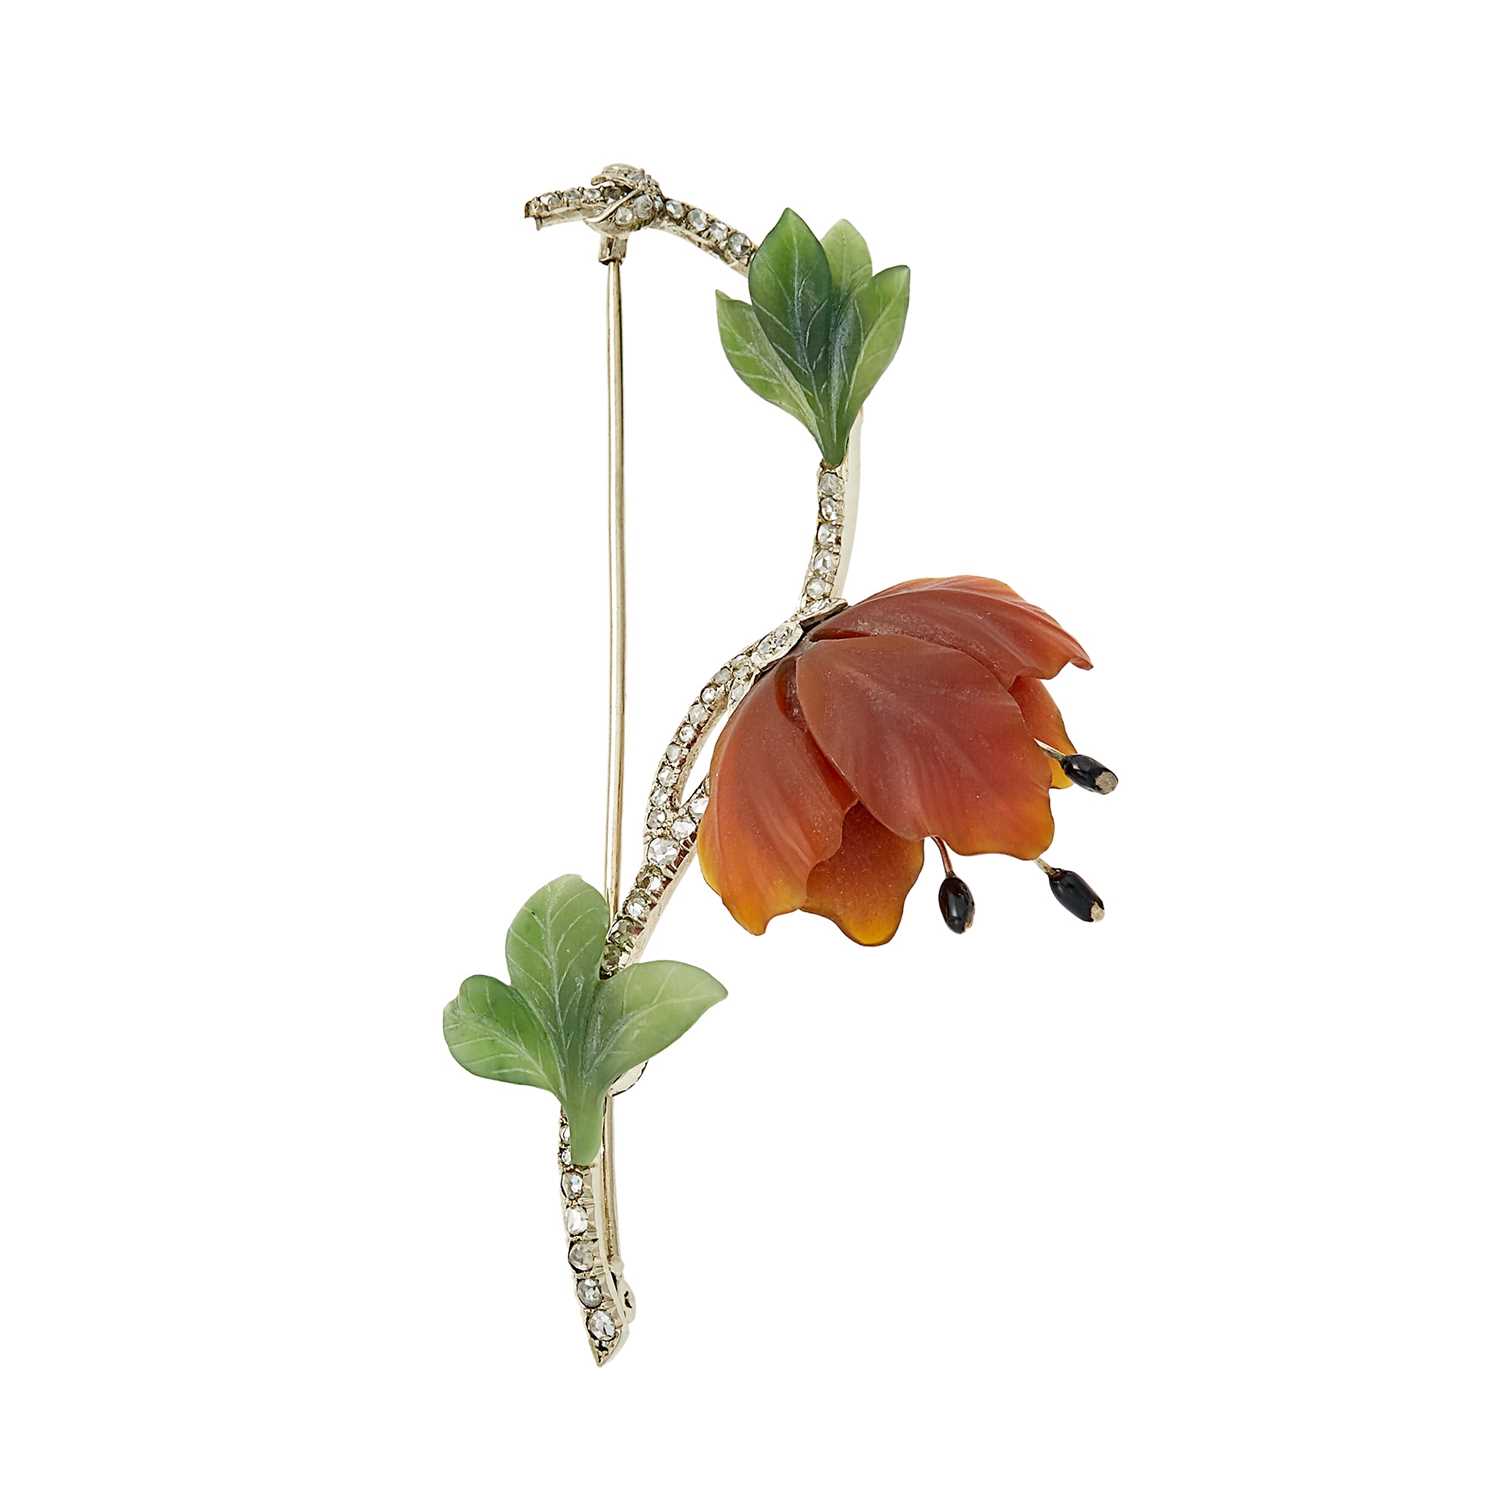 Lot 1176 - White Gold, Carved Carnelian and Nephrite, Black Enamel and Diamond Flower Brooch